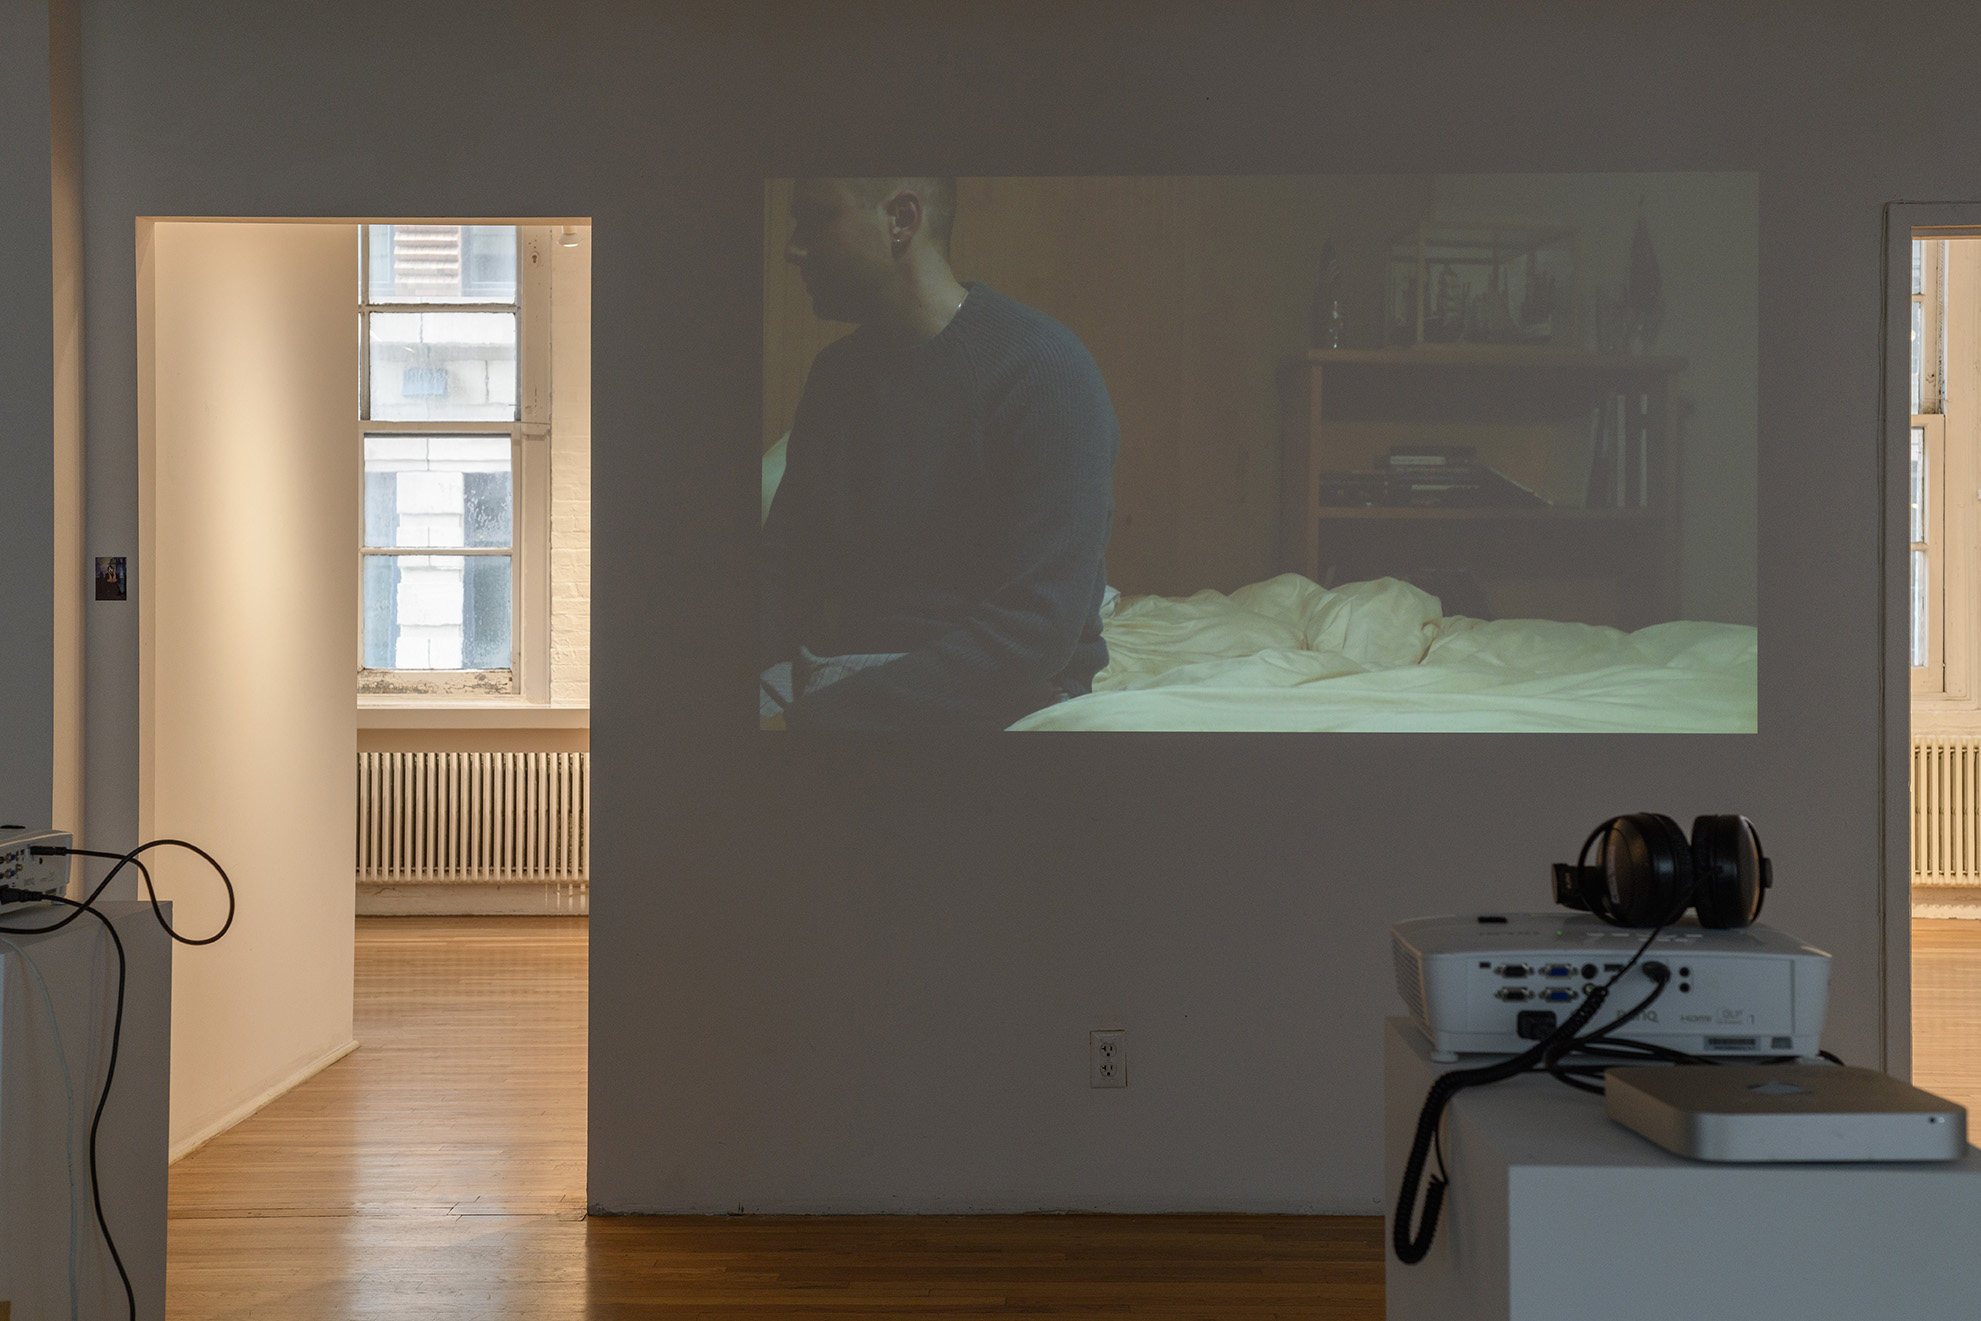 [Another view of the same projection at a different point in the video showing a person, who appears to be white, wearing a blue sweater and sitting at the edge of an unmade bed in a dim lit room, gazing outside of the frame. On either side of the projected image are doorways leading to additional galleries.]